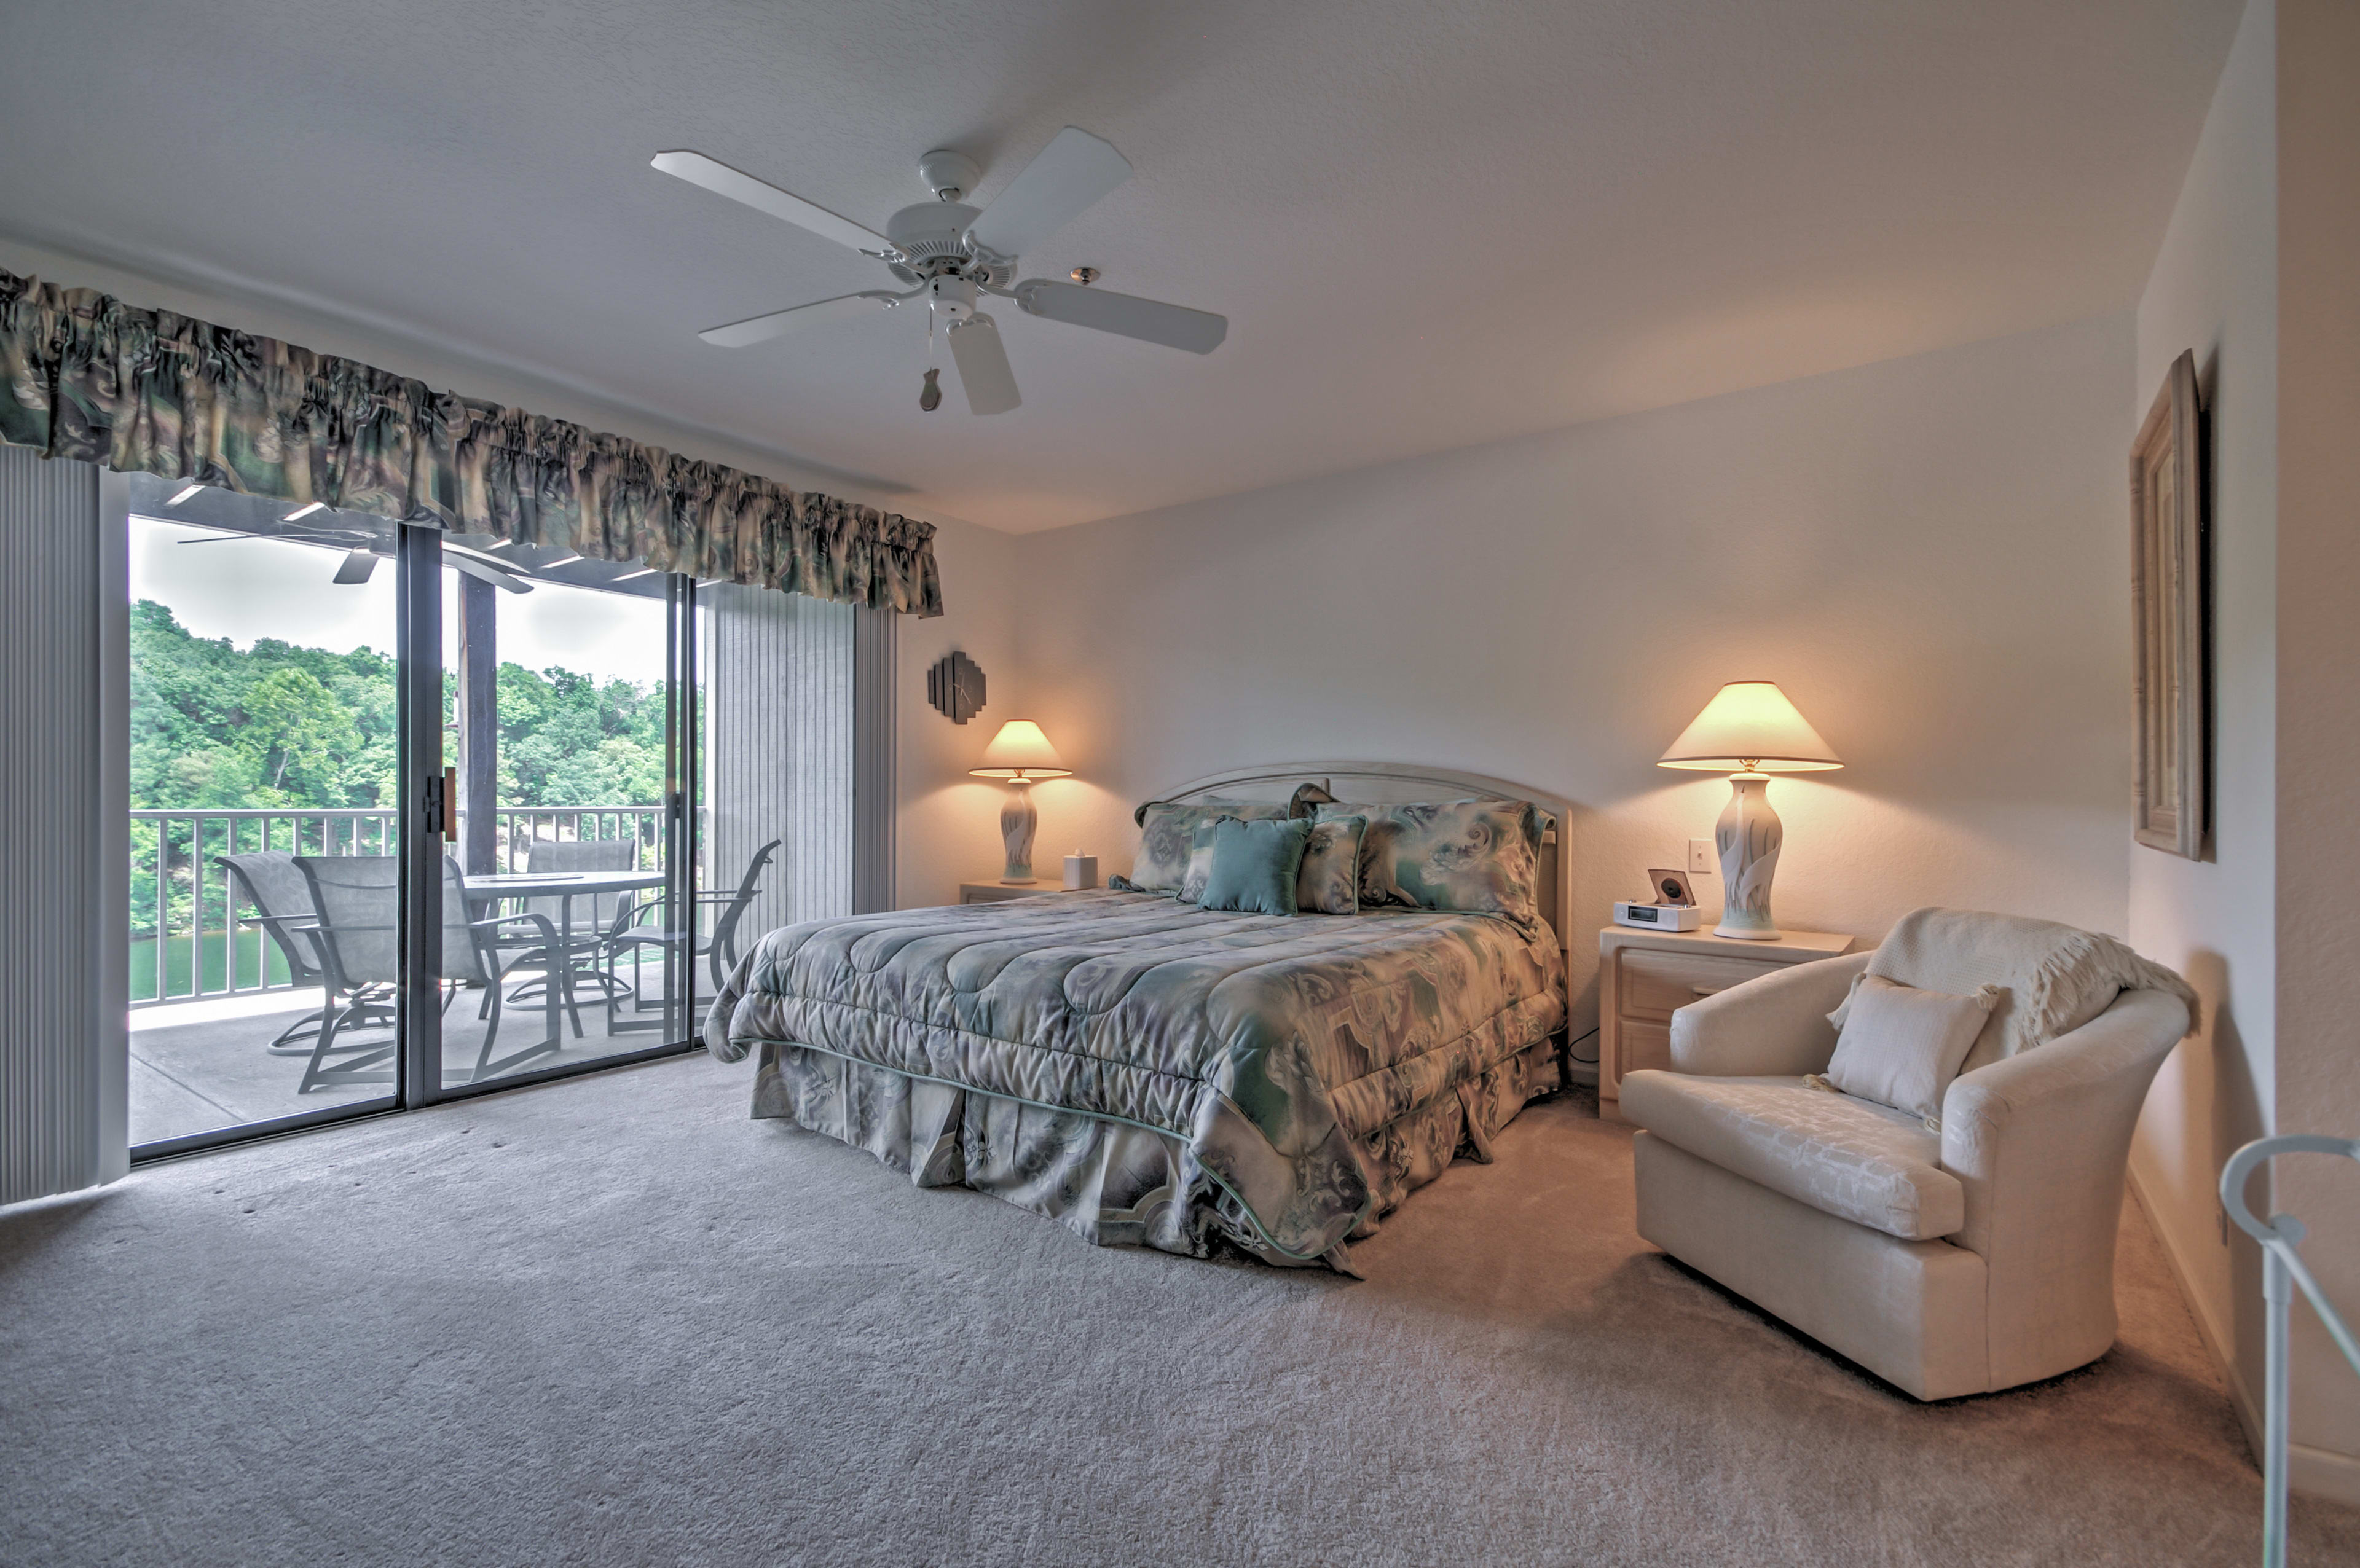 Wake up to the sun shining through the large windows after a great night's sleep in this comfy King-sized Bed.